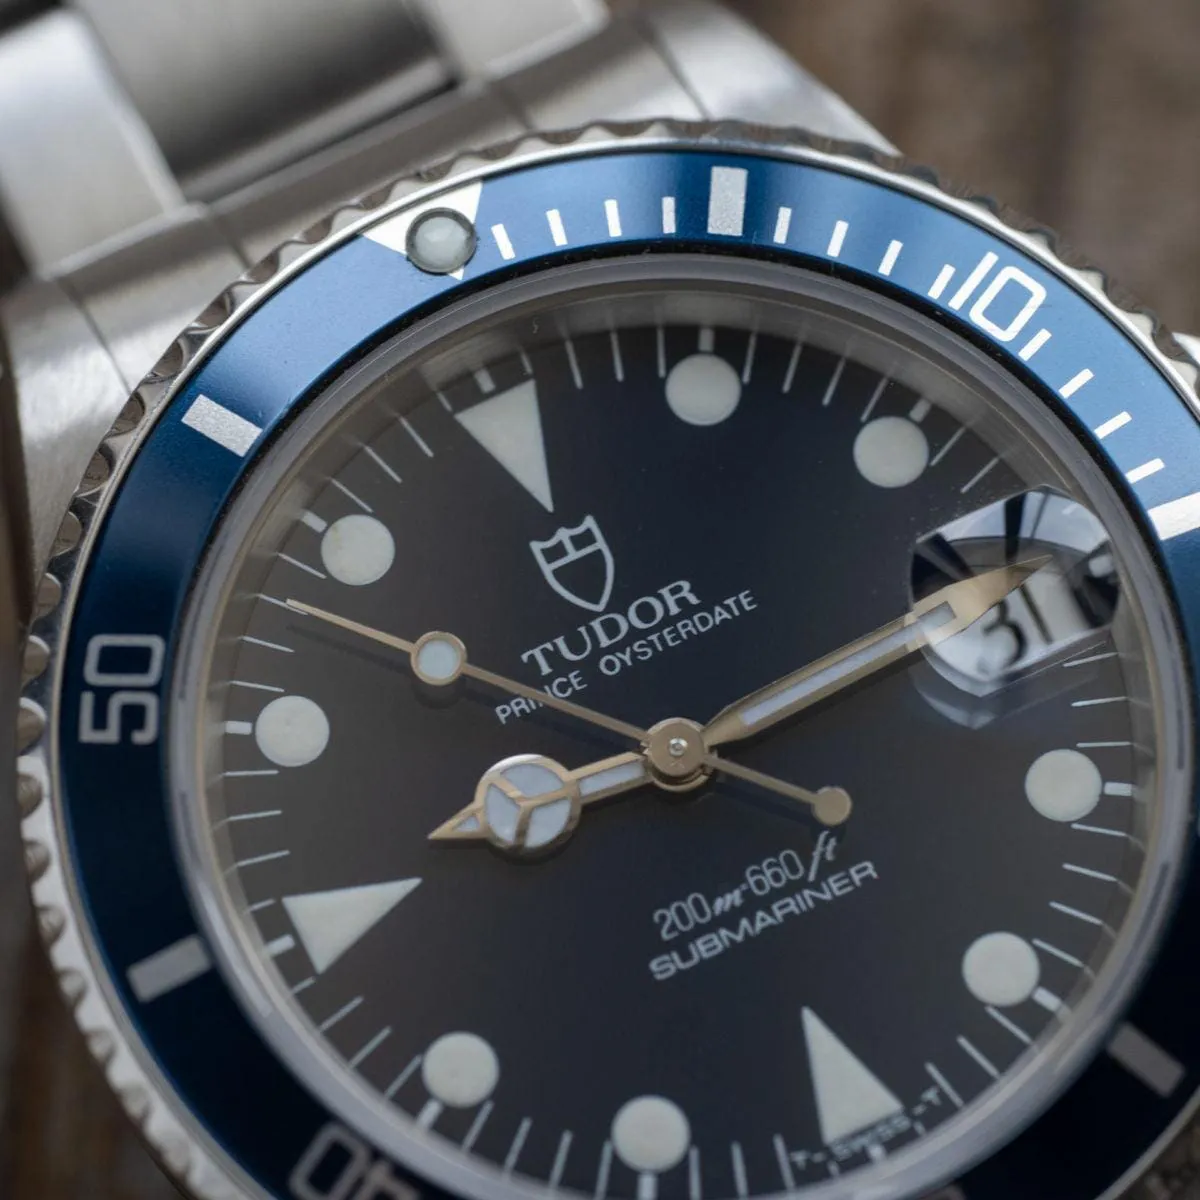 Tudor Prince Oysterdate Submariner 75090 36mm Stainless steel 5